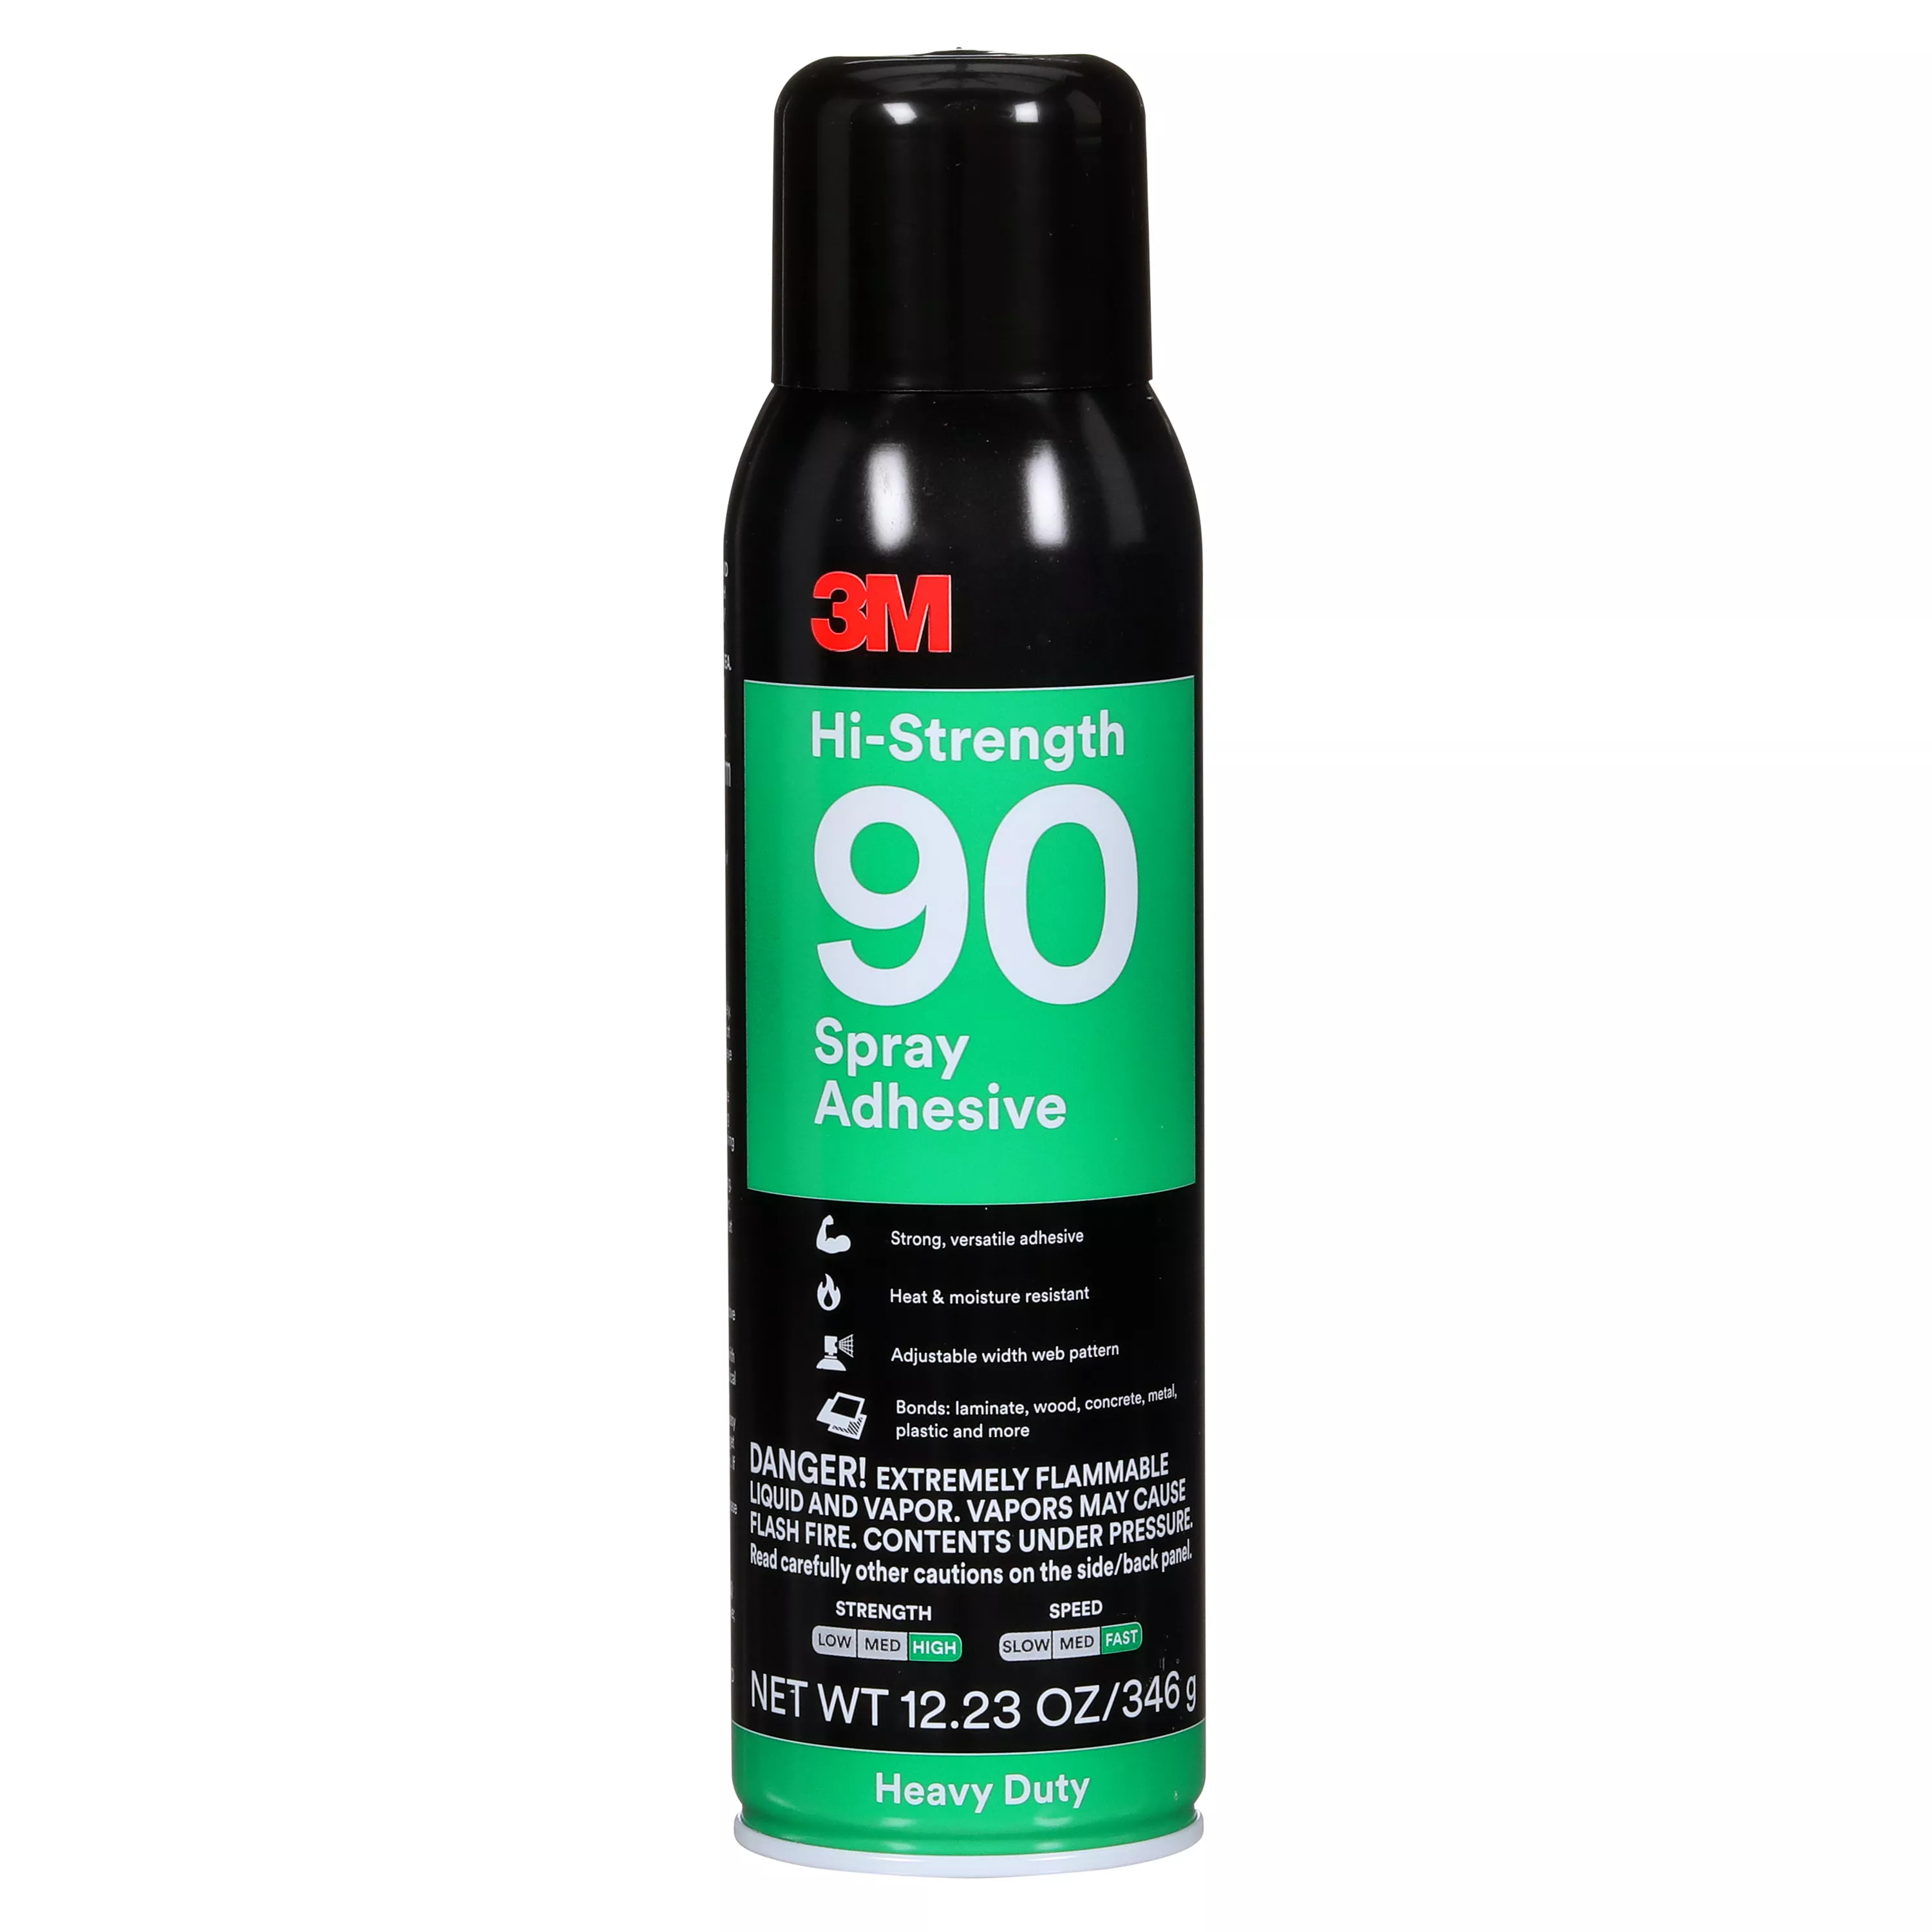 3M™ Hi-Strength Spray Adhesive 90, Clear, 16 fl oz Can (Net Wt 12.23
oz), 12/Case, NOT FOR SALE IN CA AND OTHER STATES